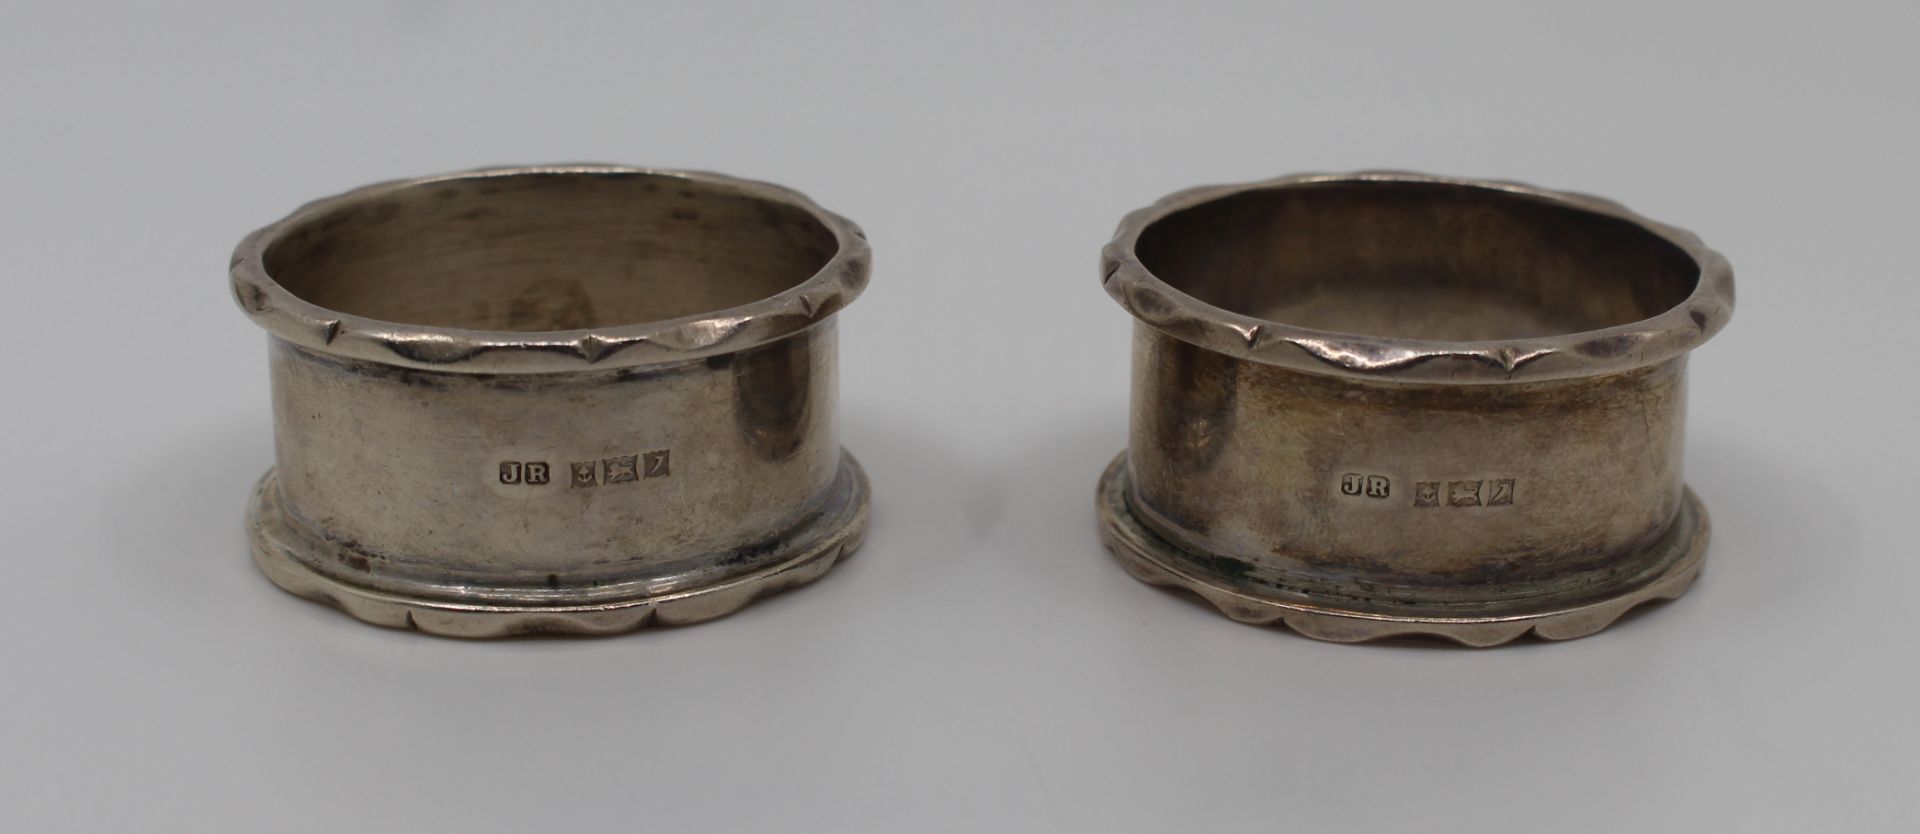 Pair of Mid 20th c. Solid Silver Napkin Rings Birmingham 1958